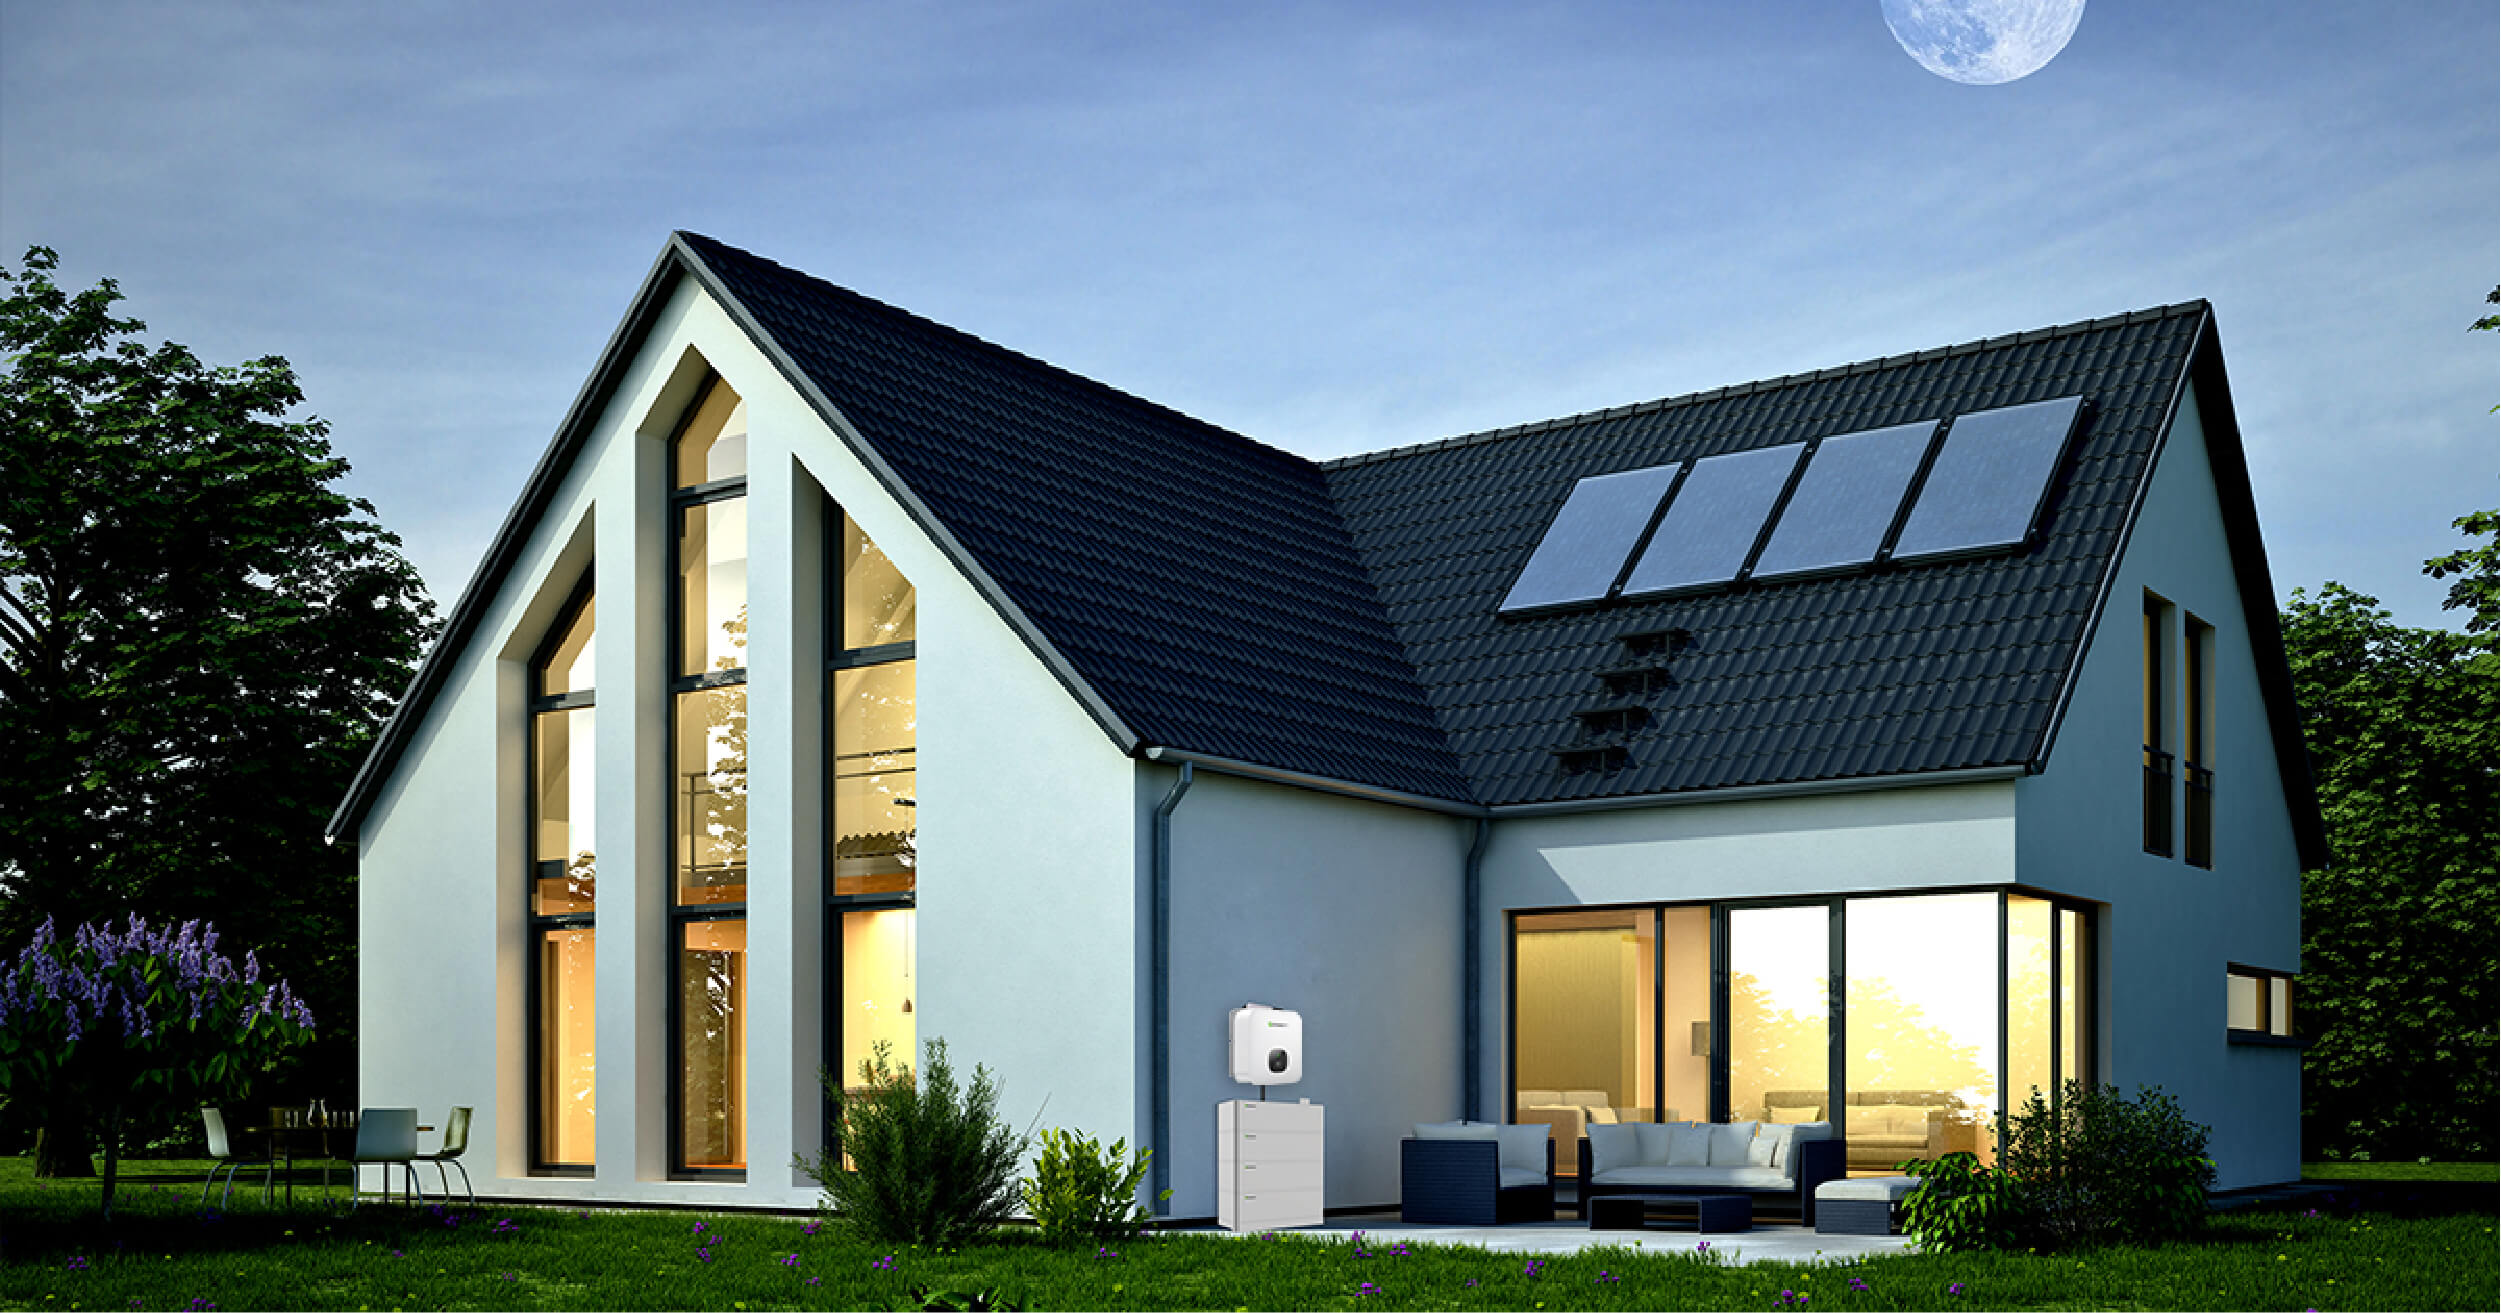 A_picture_of_a_hybrid_inverter_and_energy_storage_system_outside_of_an_Australian_house.jpg